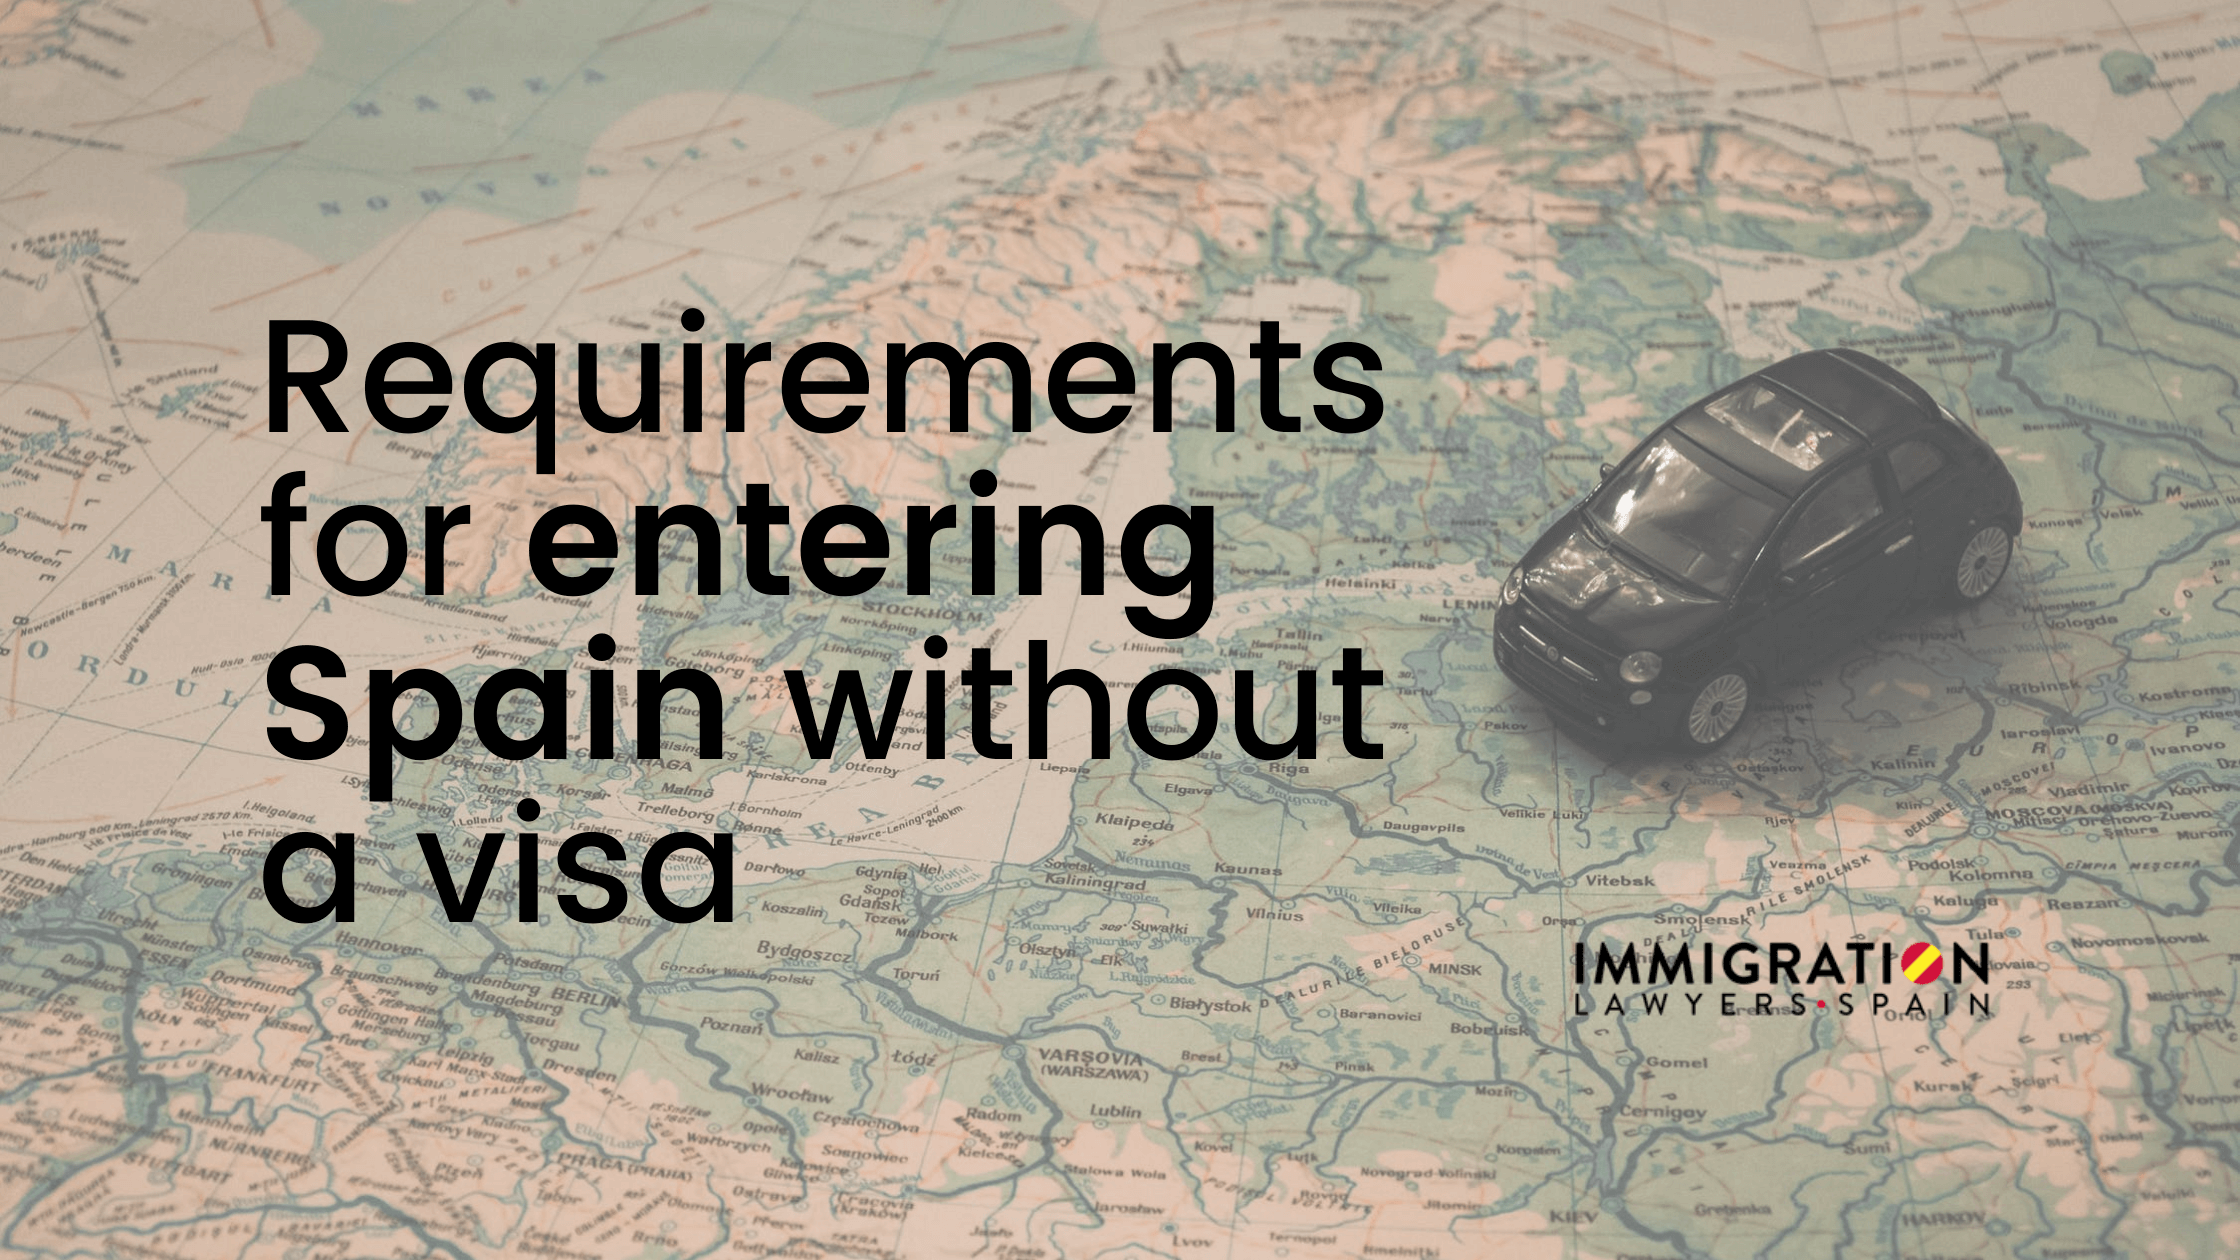 requirements for entering Spain without visa